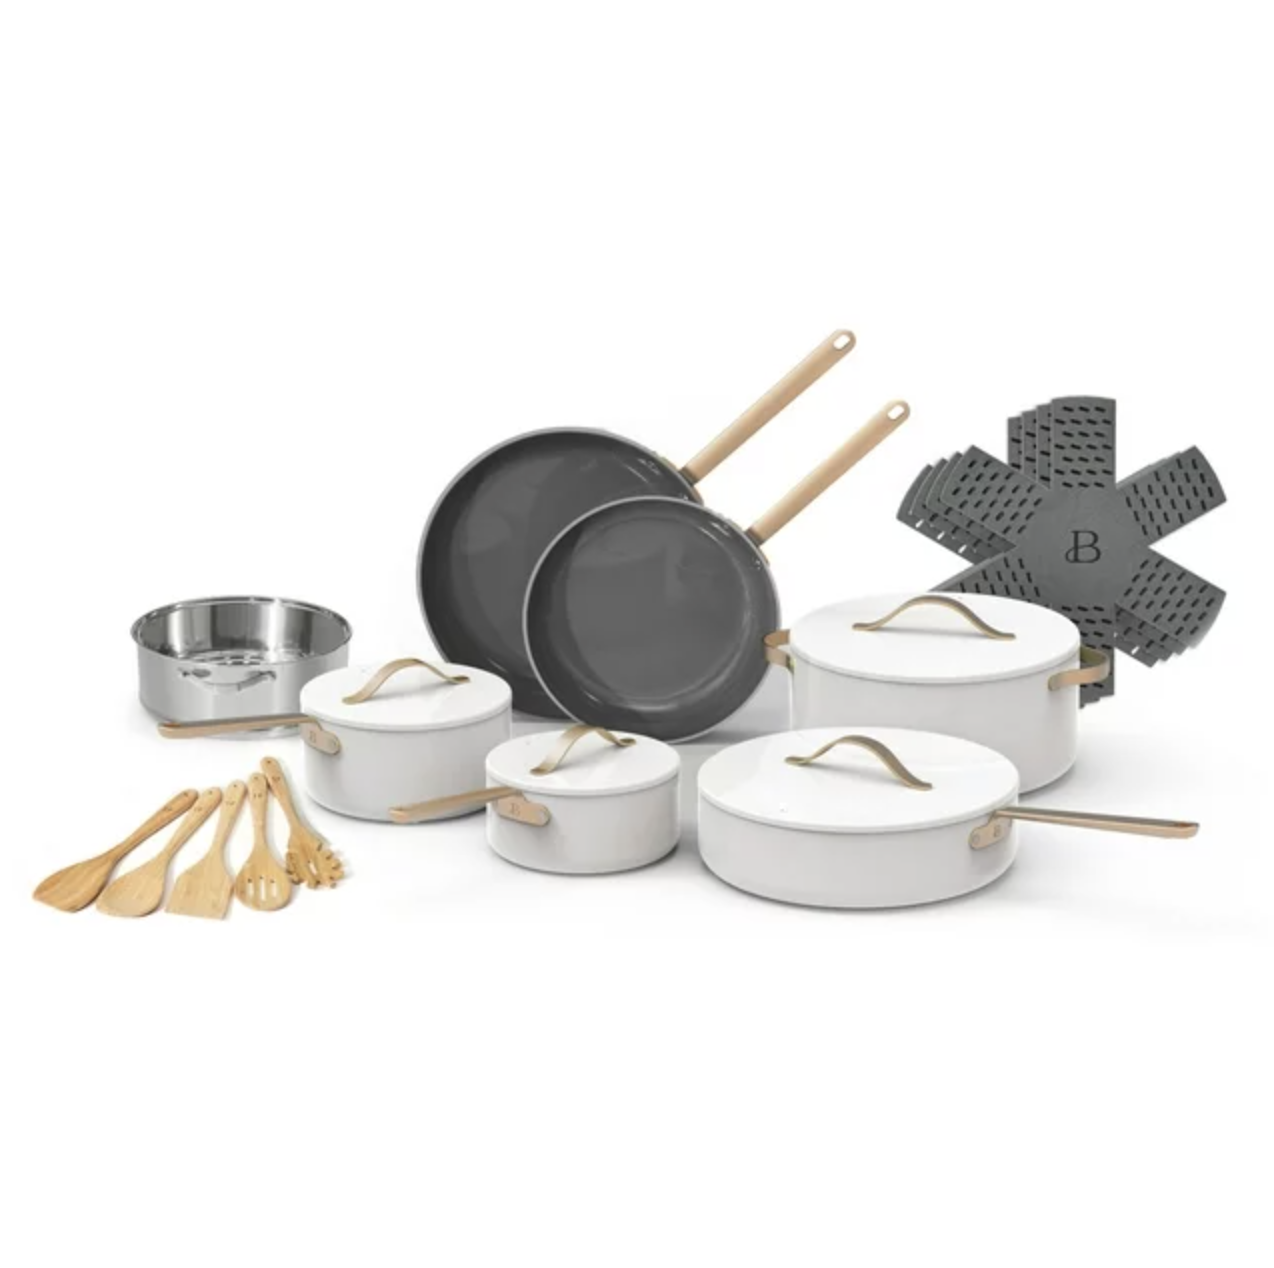 Cookware set with two pans, five pots, lids, and wooden utensils